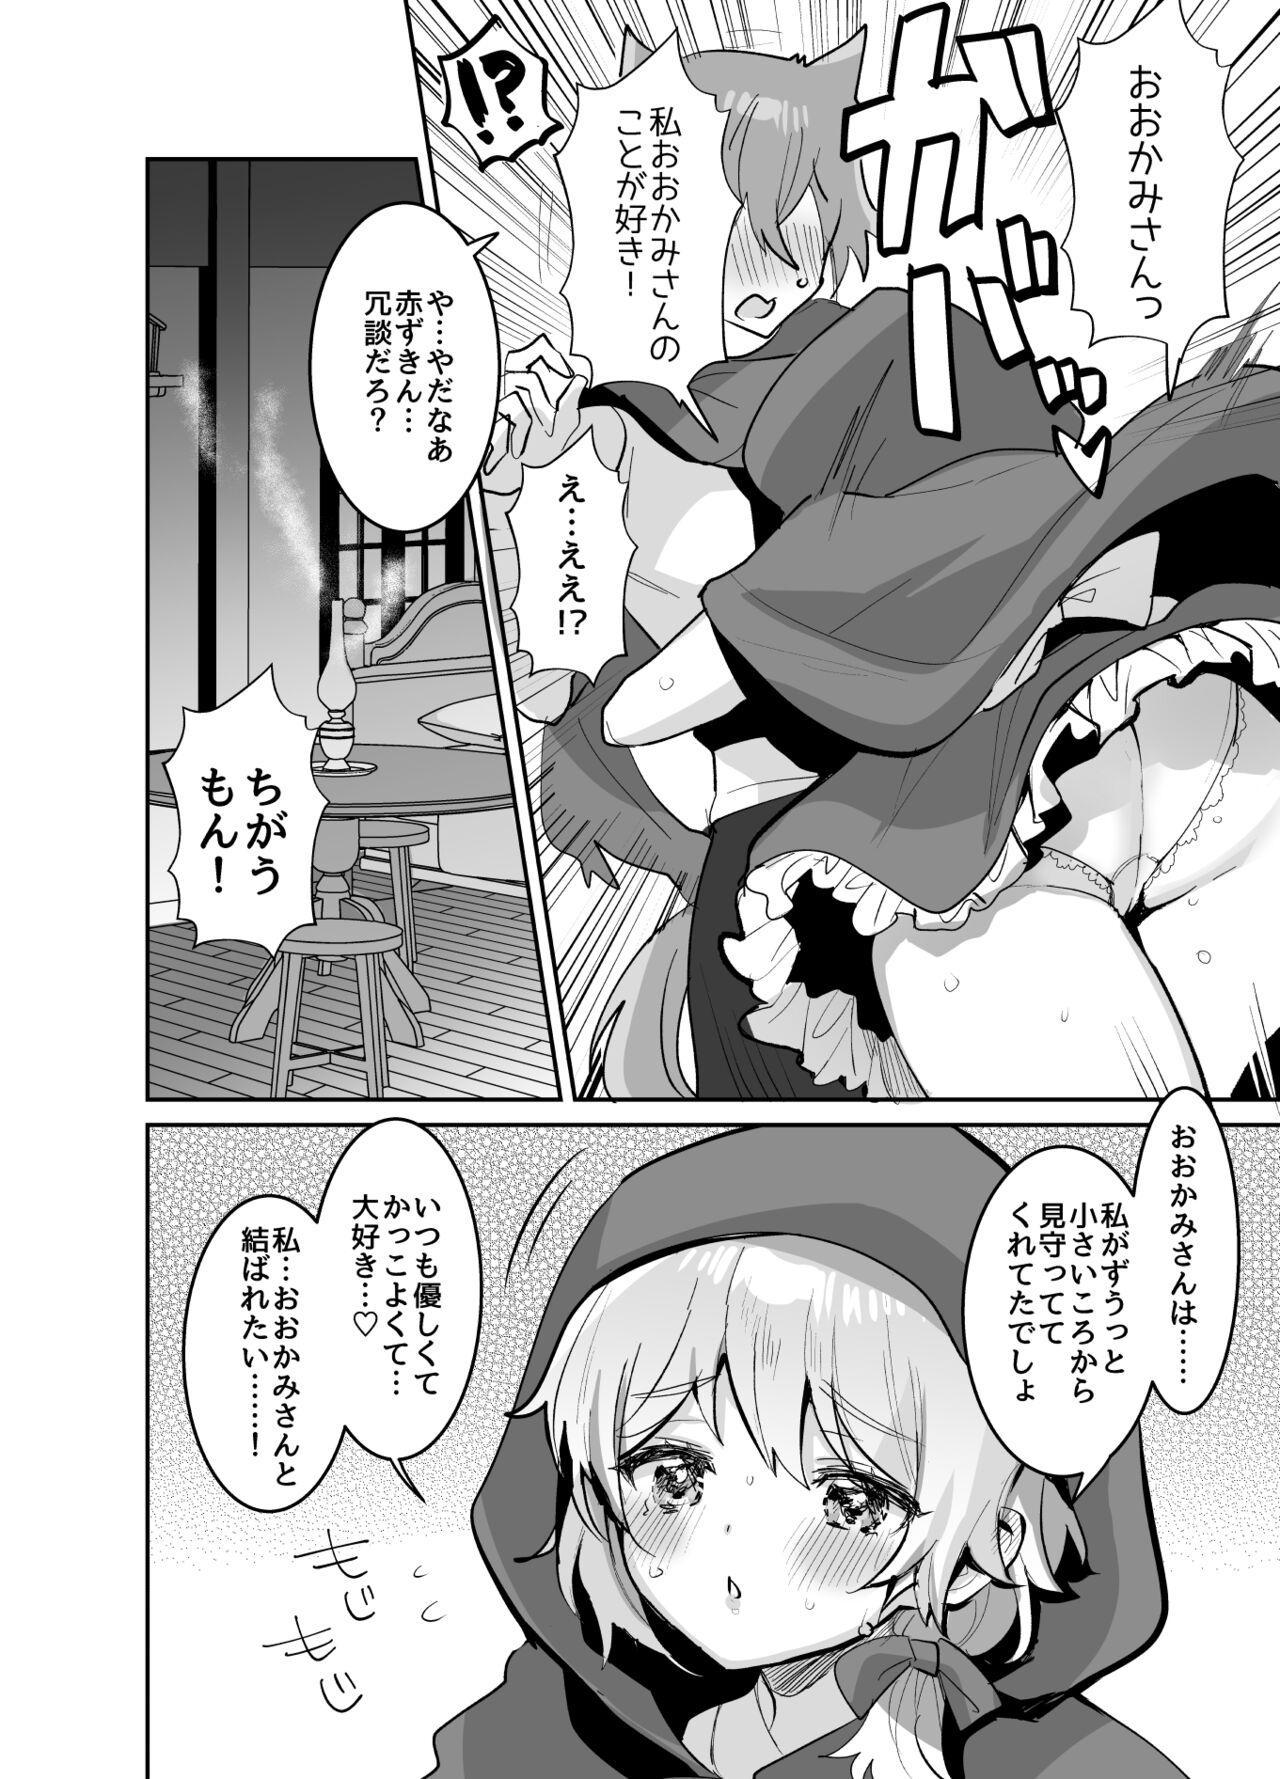 Camwhore 赤ずきんちゃんに犯される!! - Little red riding hood Indonesian - Page 5